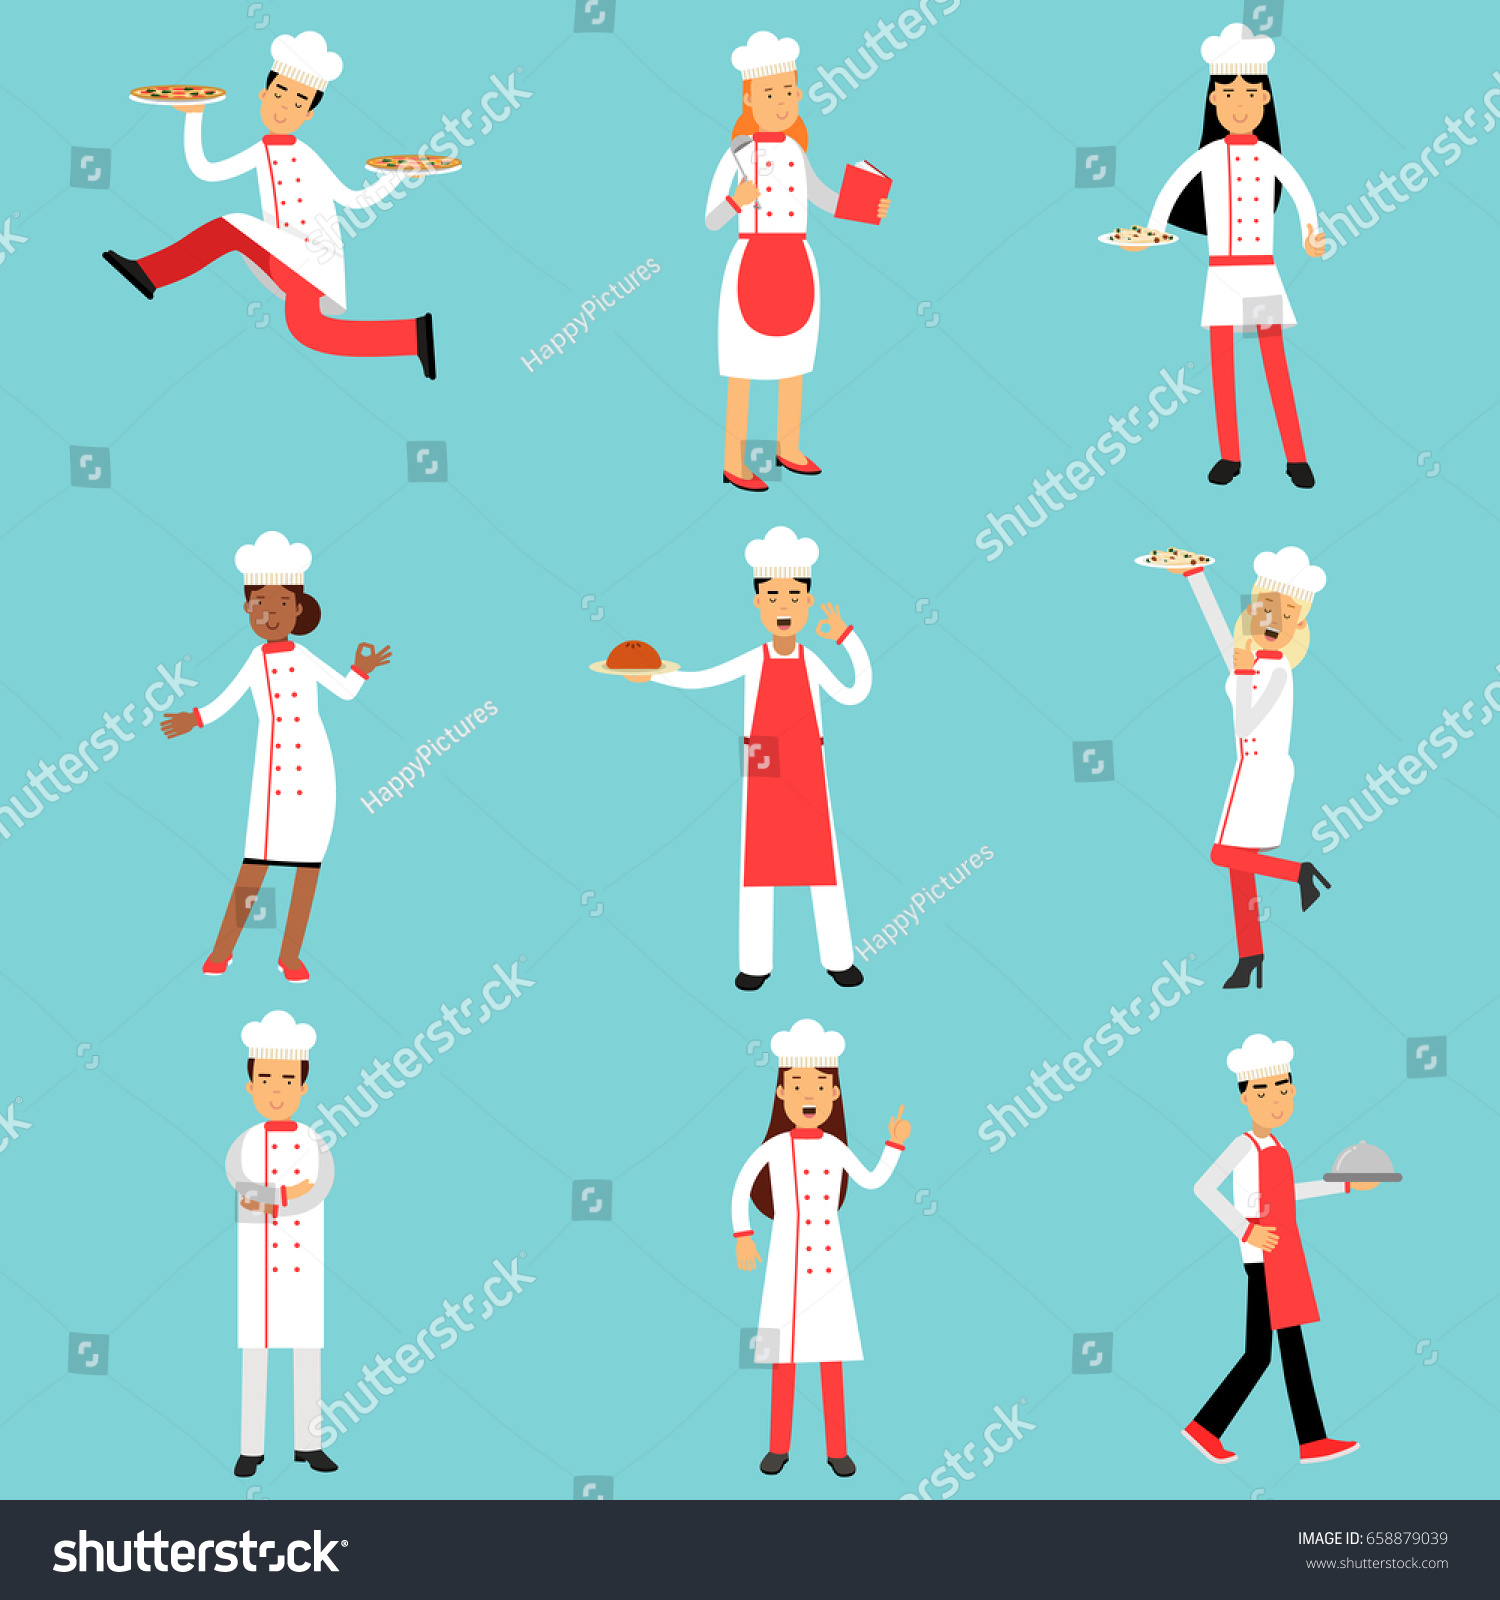 Chief cooks and bakers at work set. Professional kitchen staff Illustrations #658879039